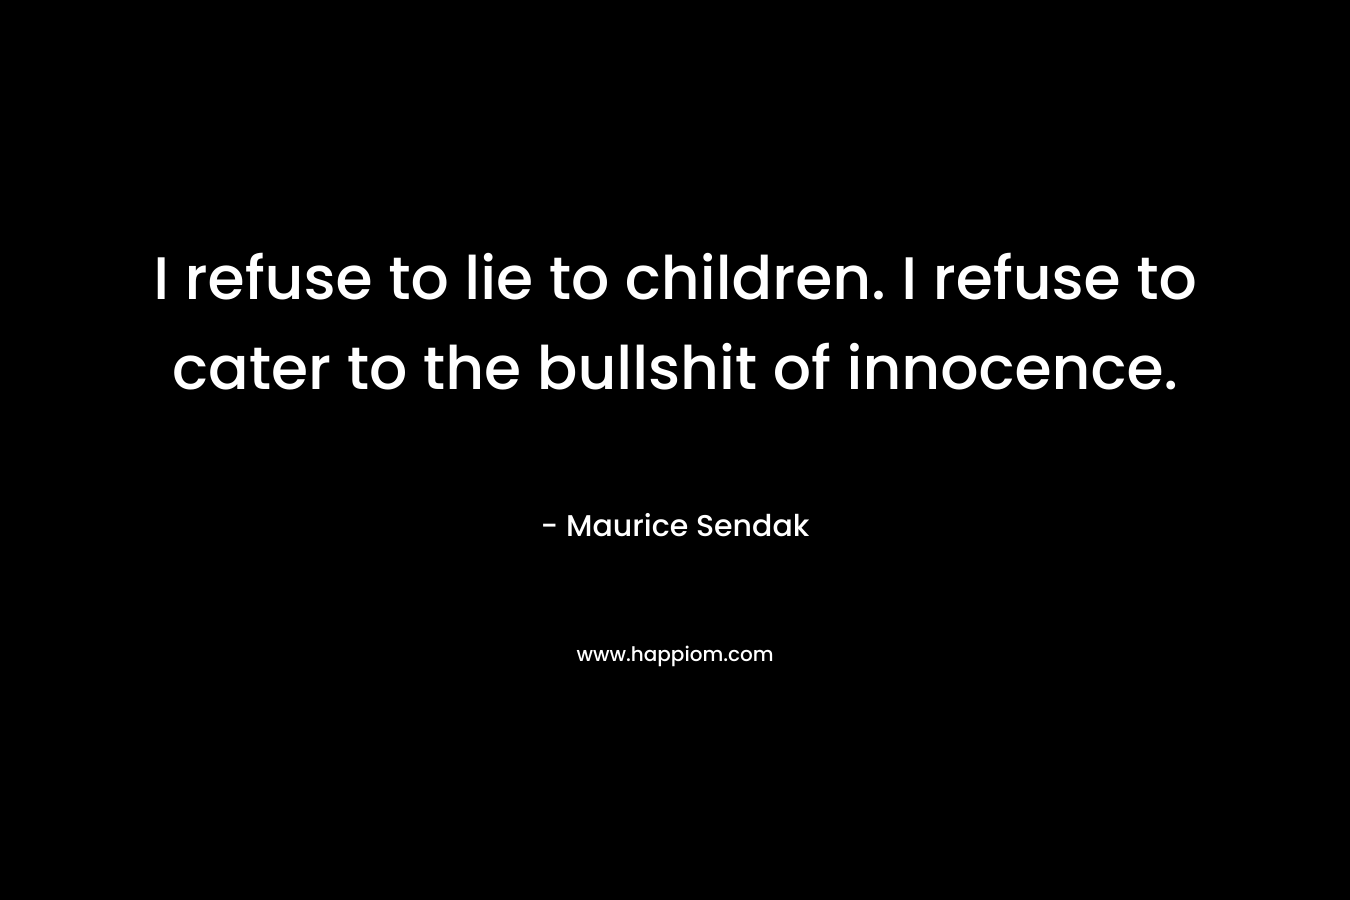 I refuse to lie to children. I refuse to cater to the bullshit of innocence.